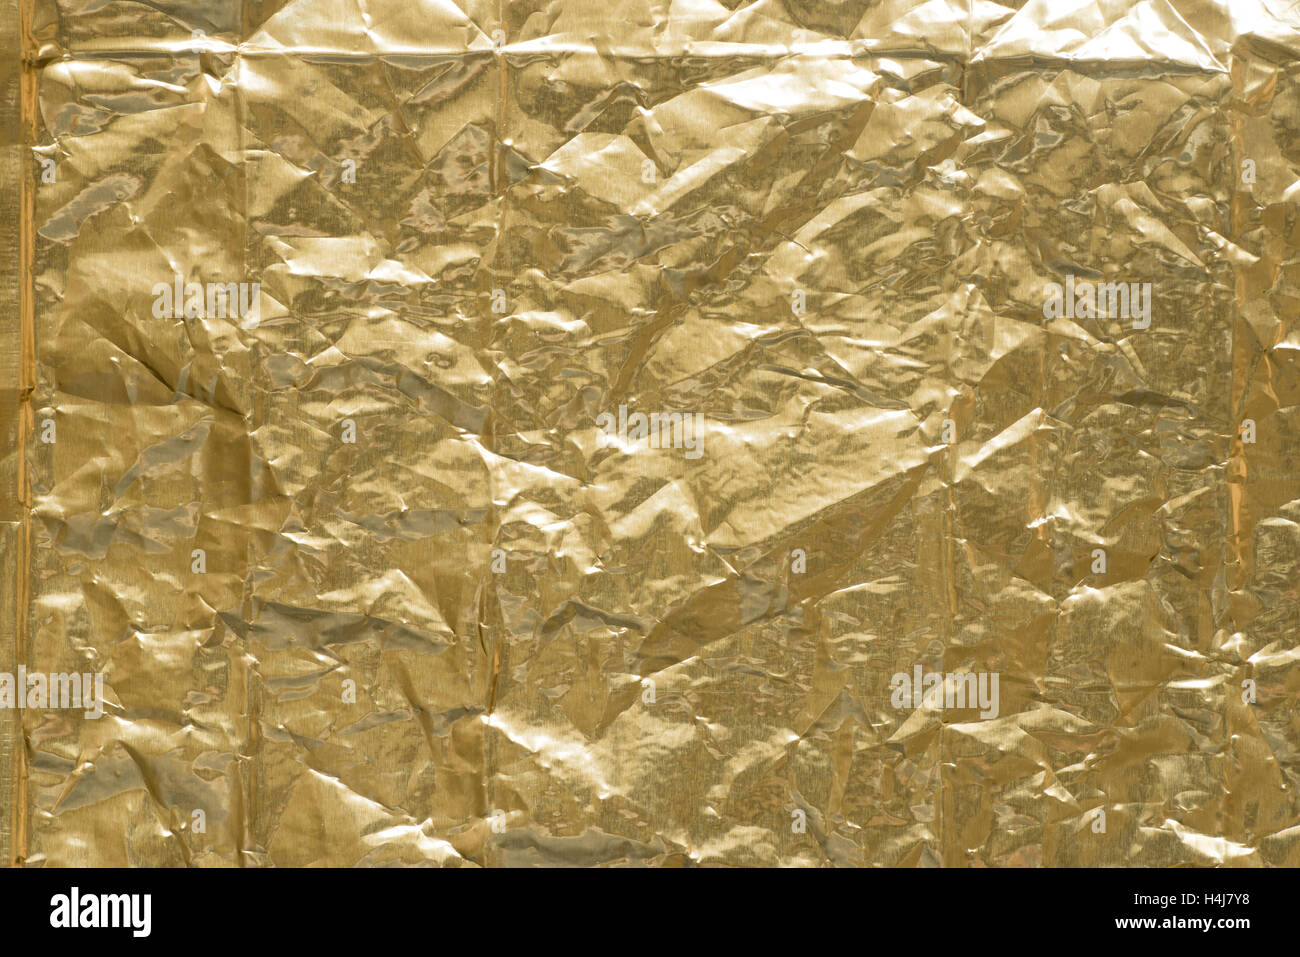 creased gold creased metallic foil background texture Stock Photo